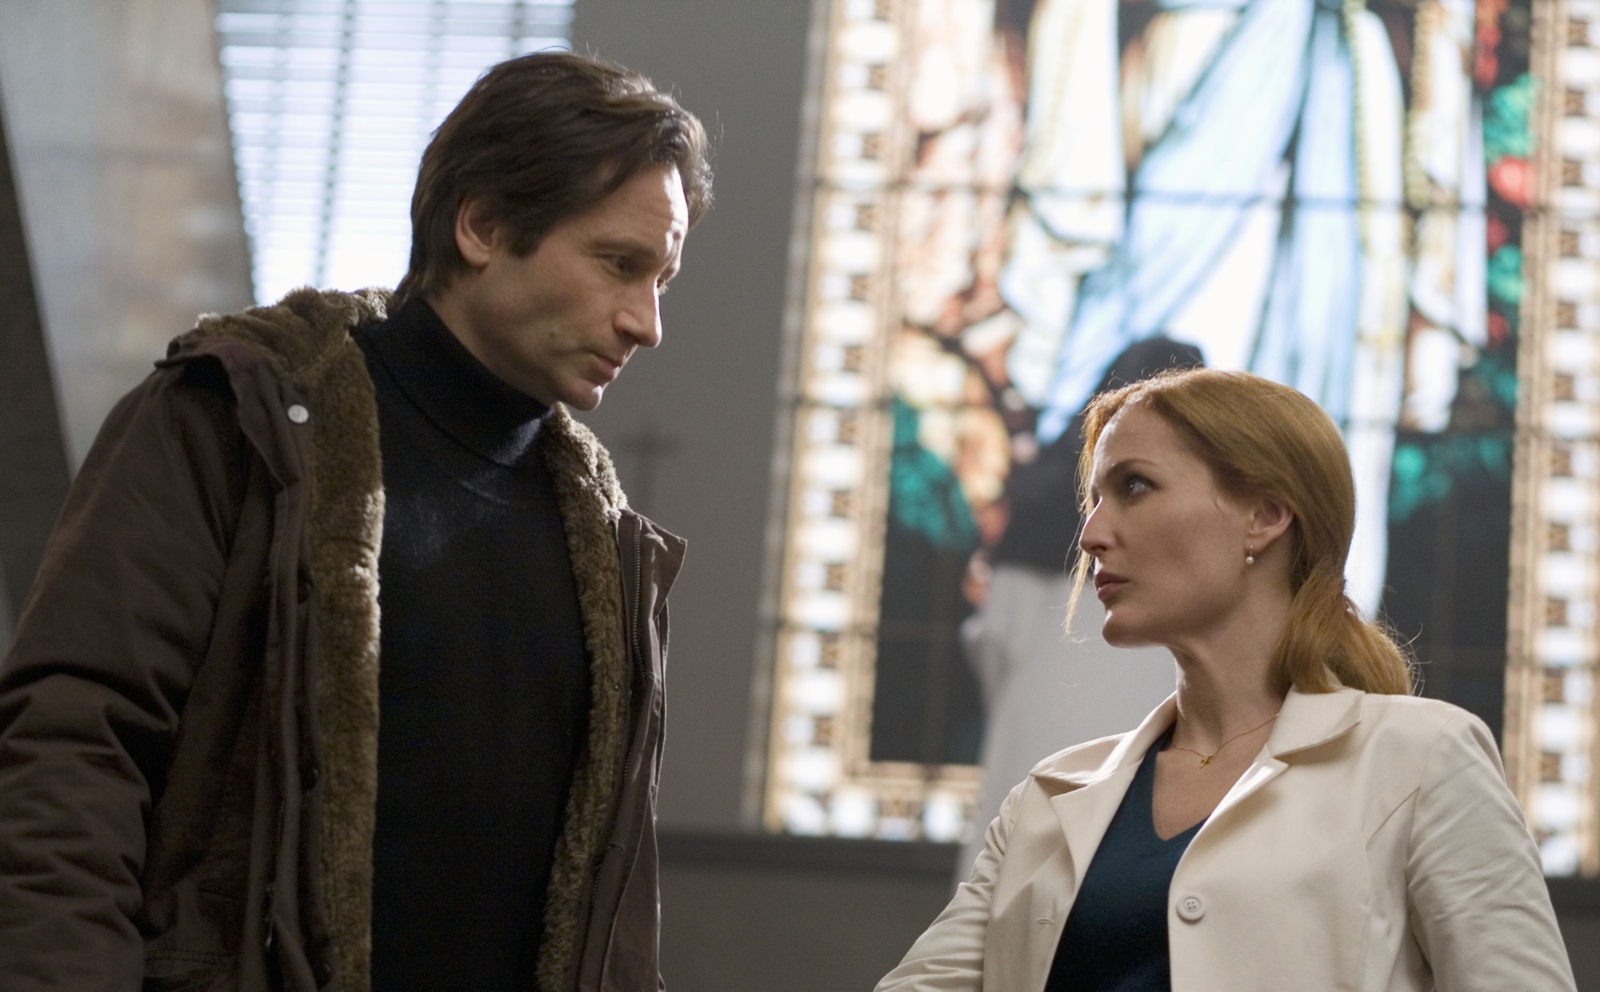 The truth is here: chris carter, david duchovny, and gillian anderson all want “x-files 3”